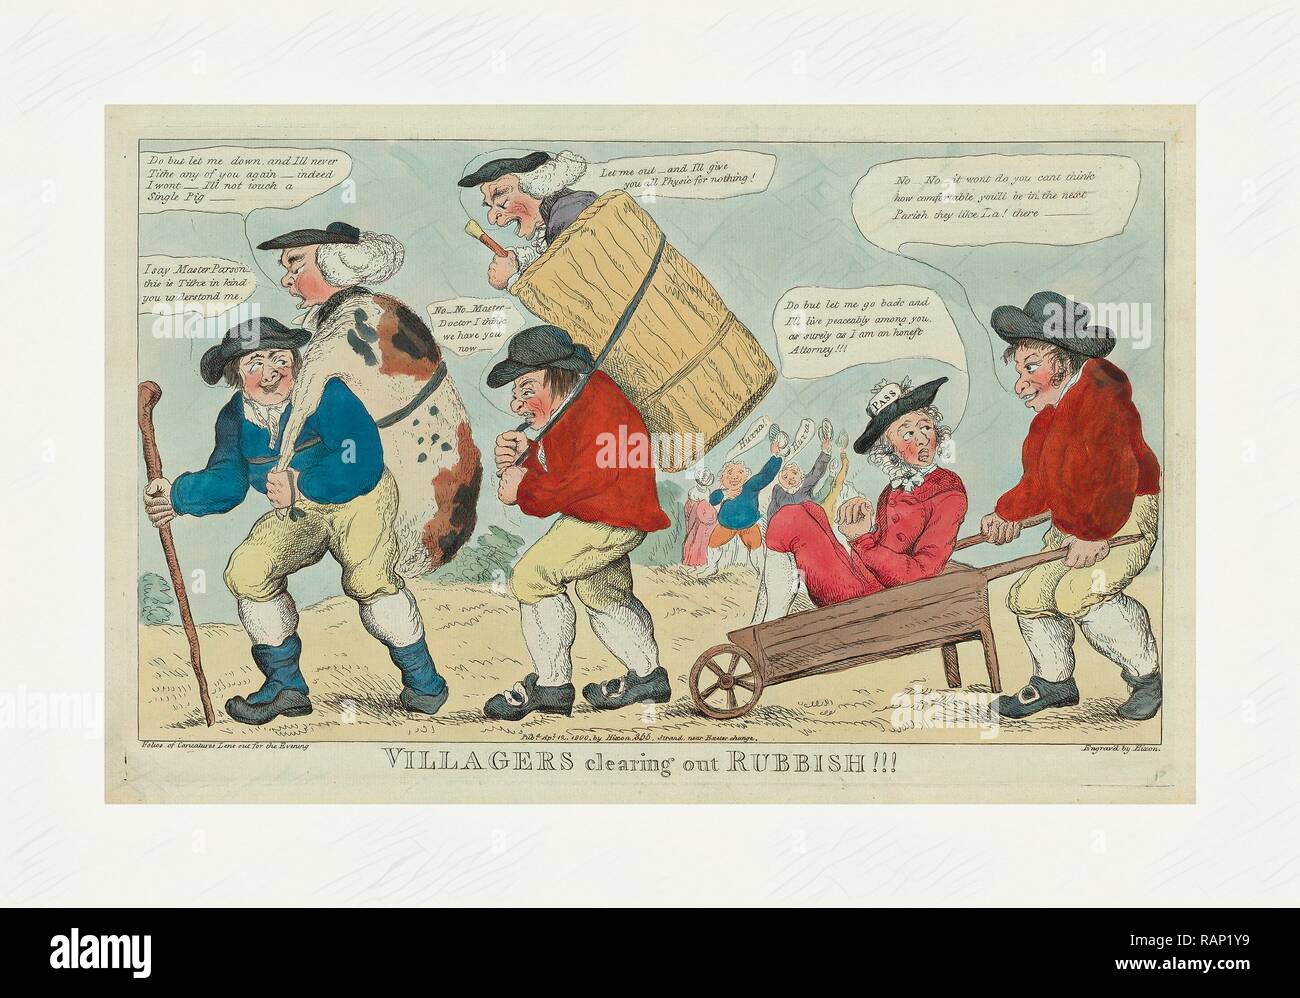 Villagers clearing out rubbish!!! engrav'd by Hixon, London, engraving 1800, three villagers transporting a parson, a reimagined Stock Photo